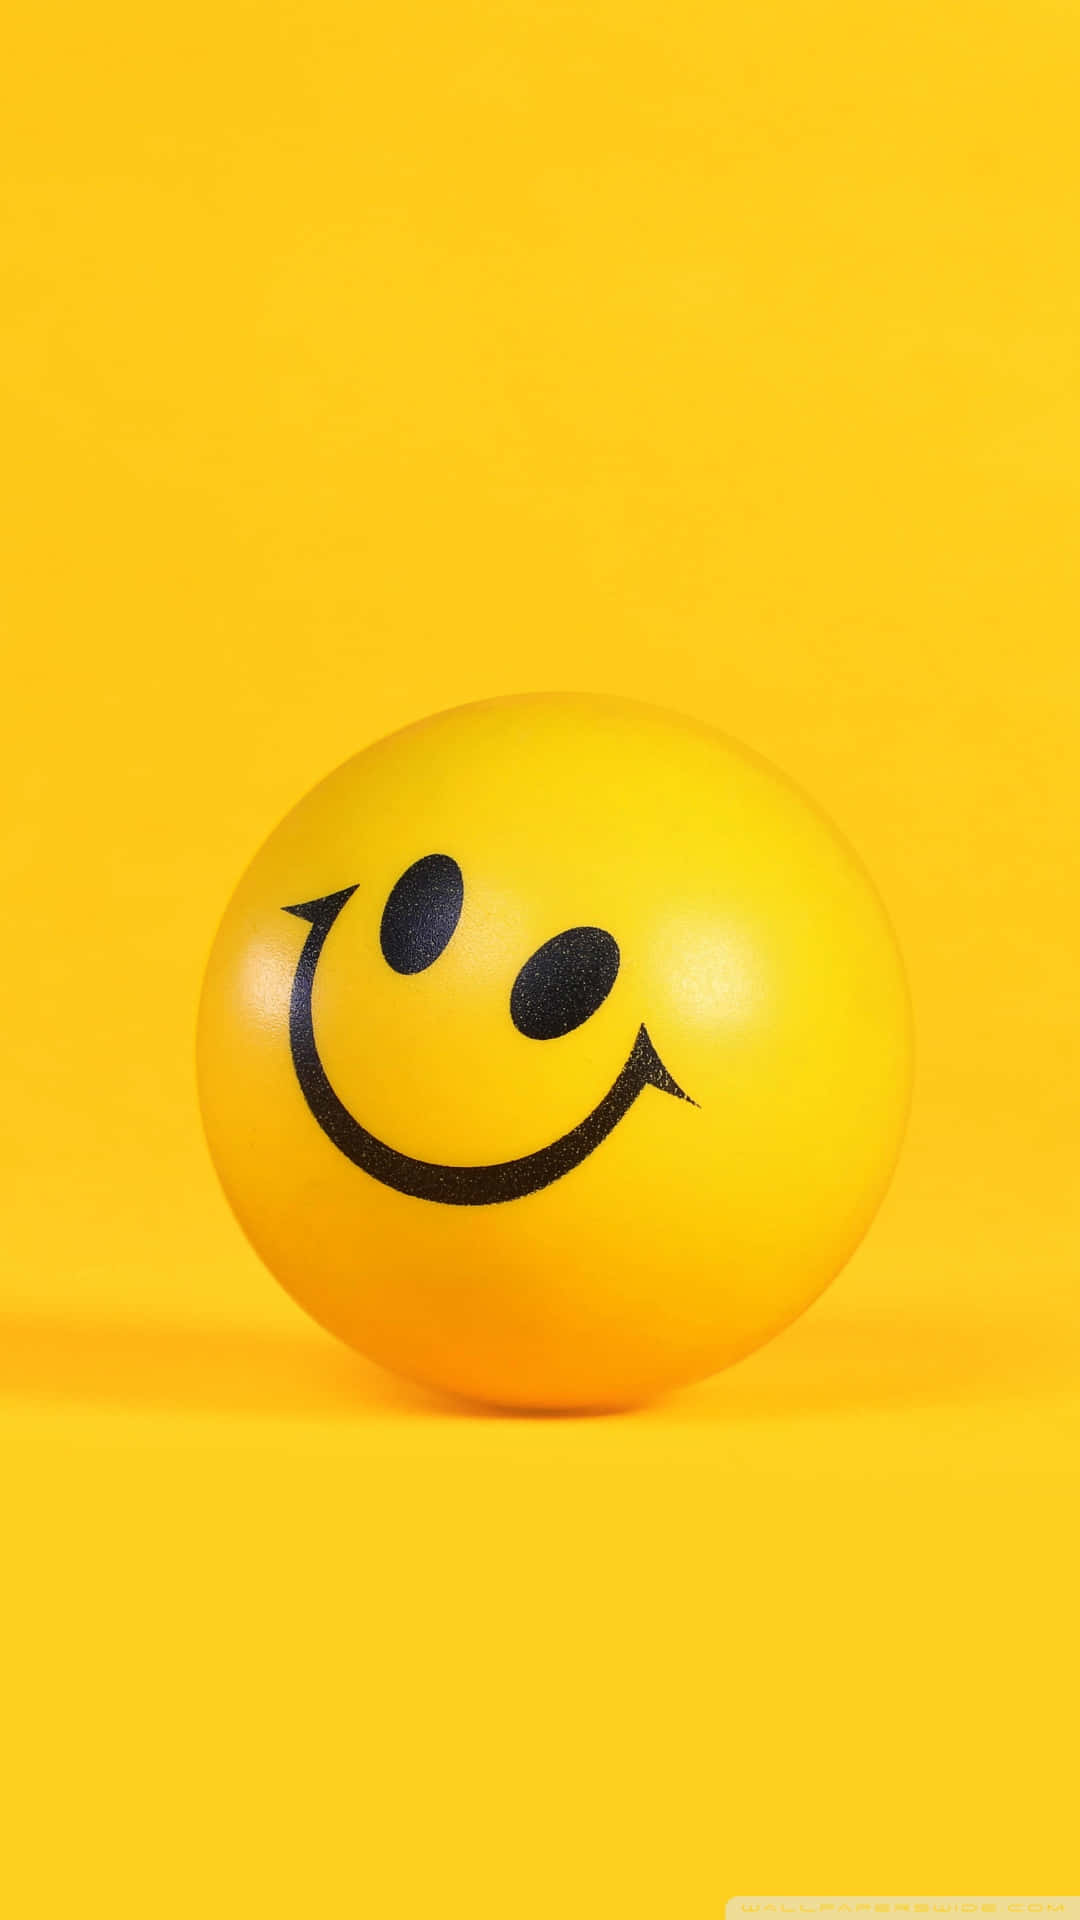 Vibrant Aesthetic Smiley Face on a Retro Background Wallpaper